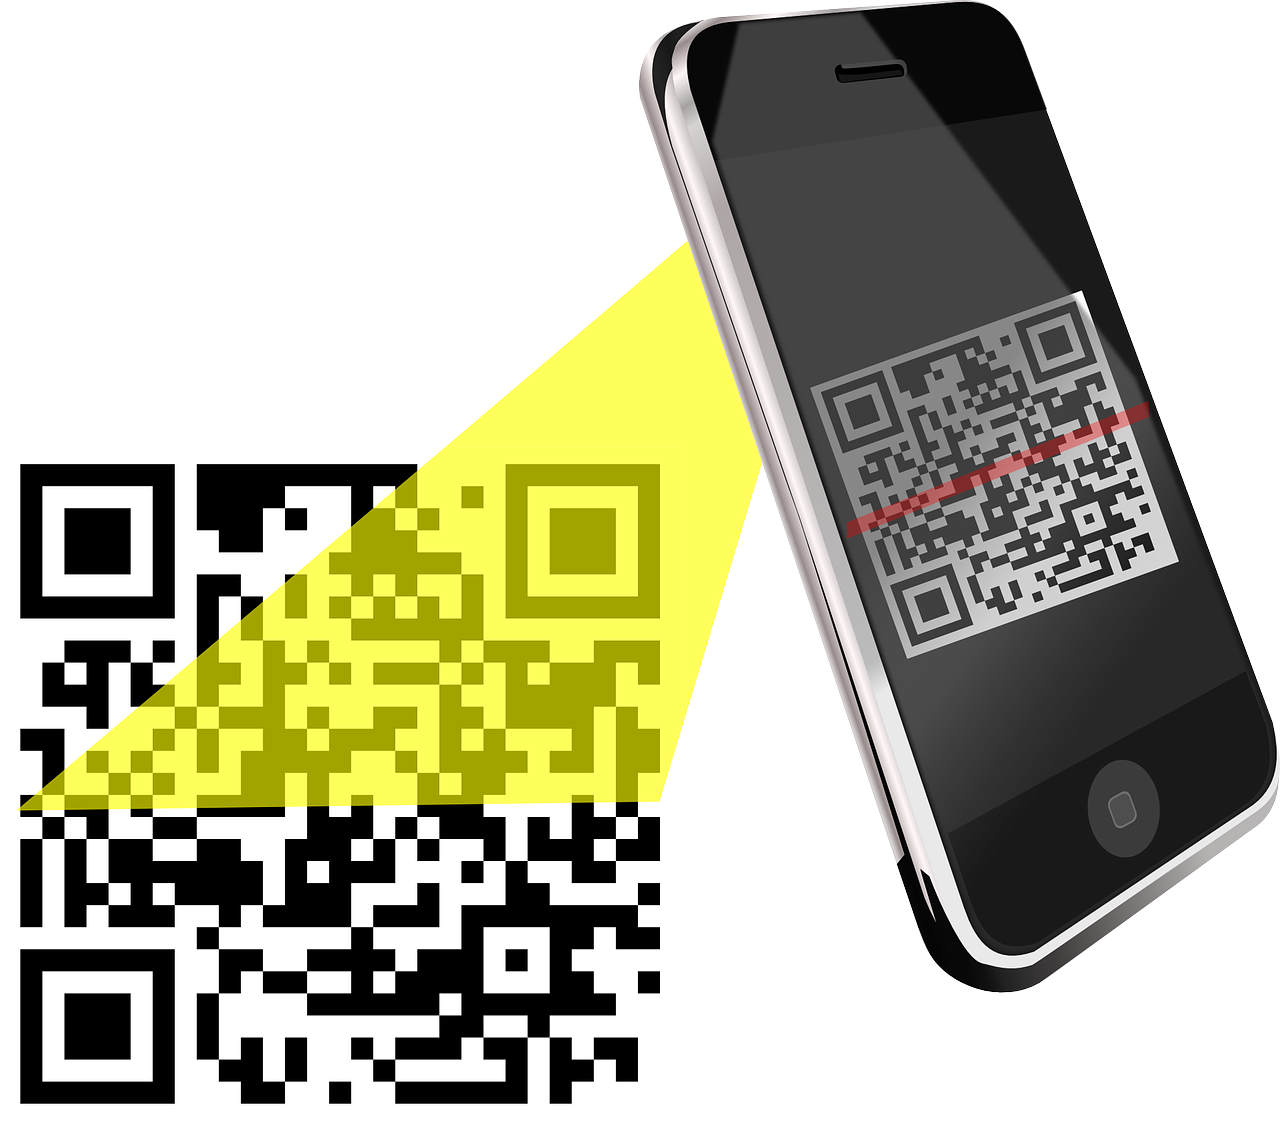 How to change an image into QR code?